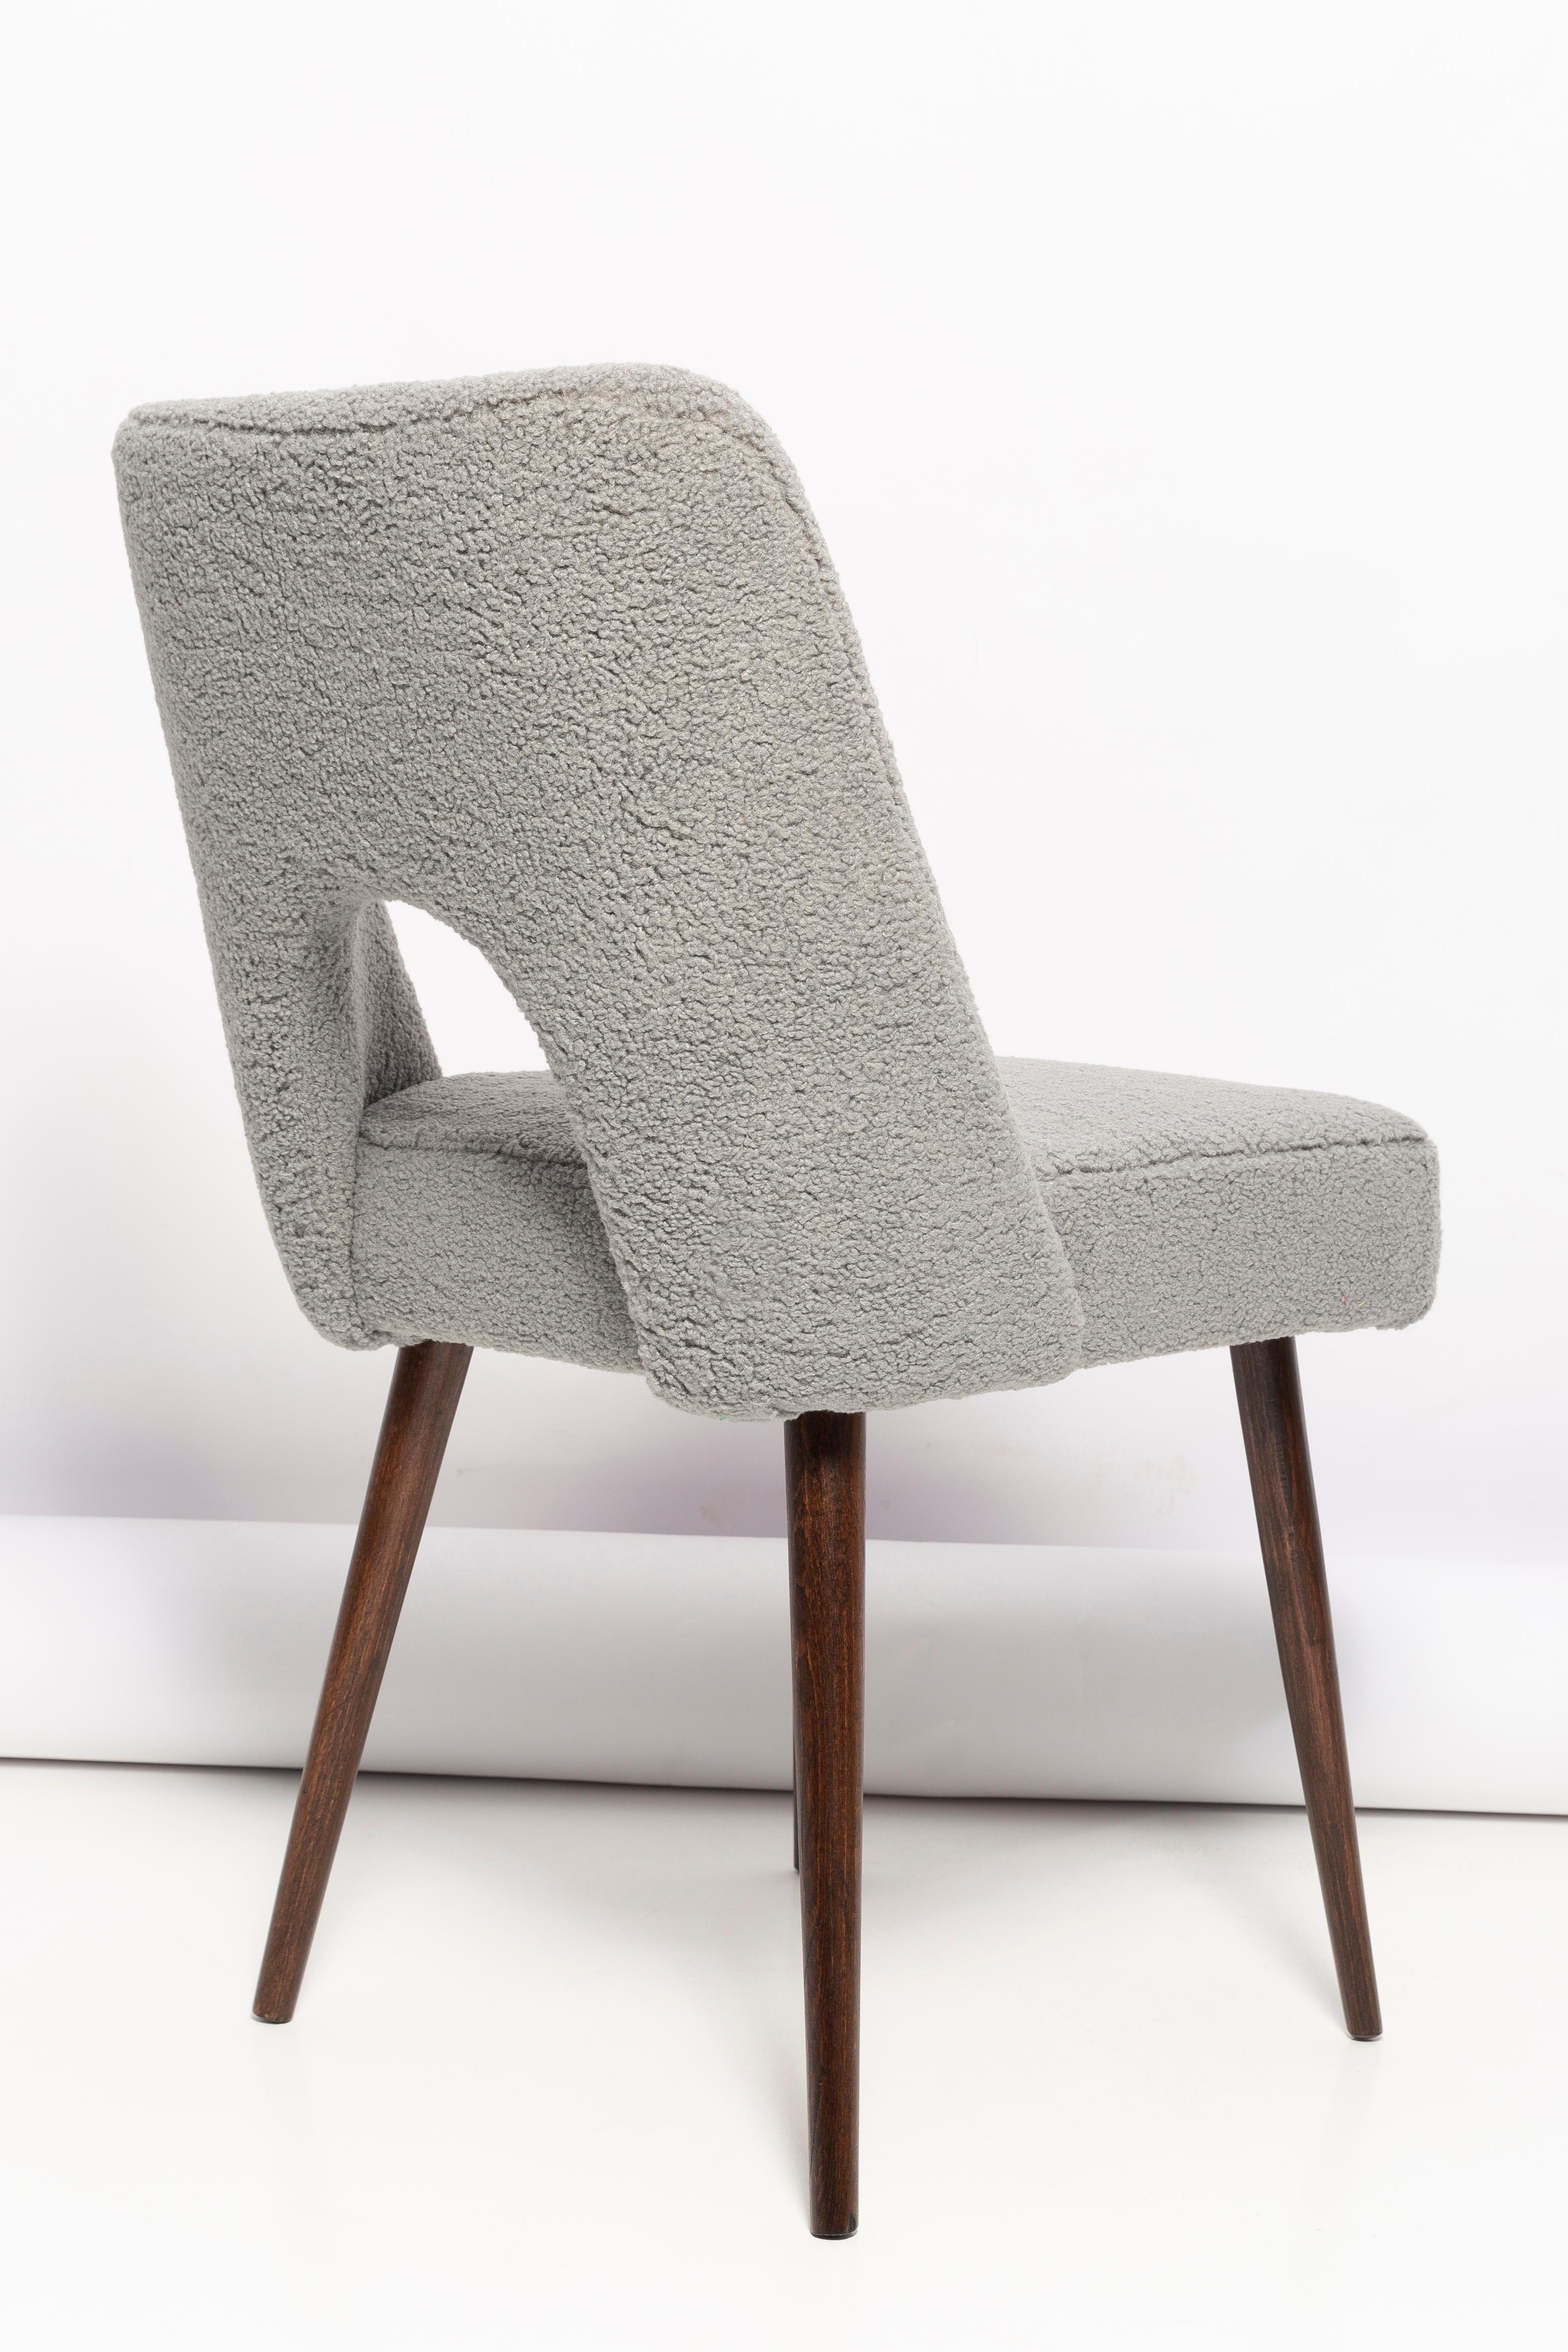 Hand-Crafted Gray Boucle 'Shell' Chair, Dark Brown Beech Wood, Poland, 1960s For Sale